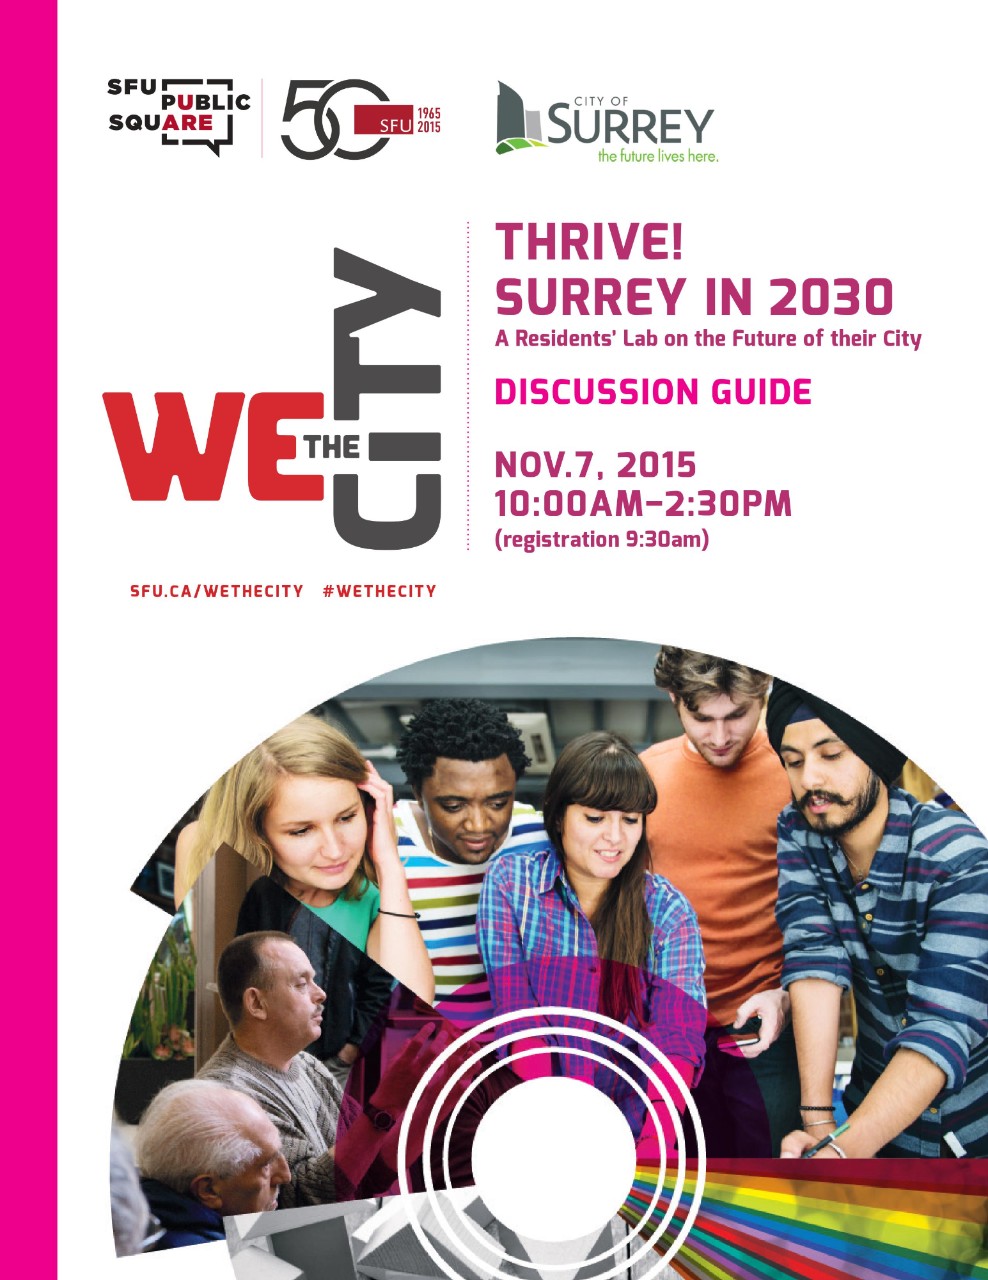 Thrive! Surrey in 2030 Discussion Guide